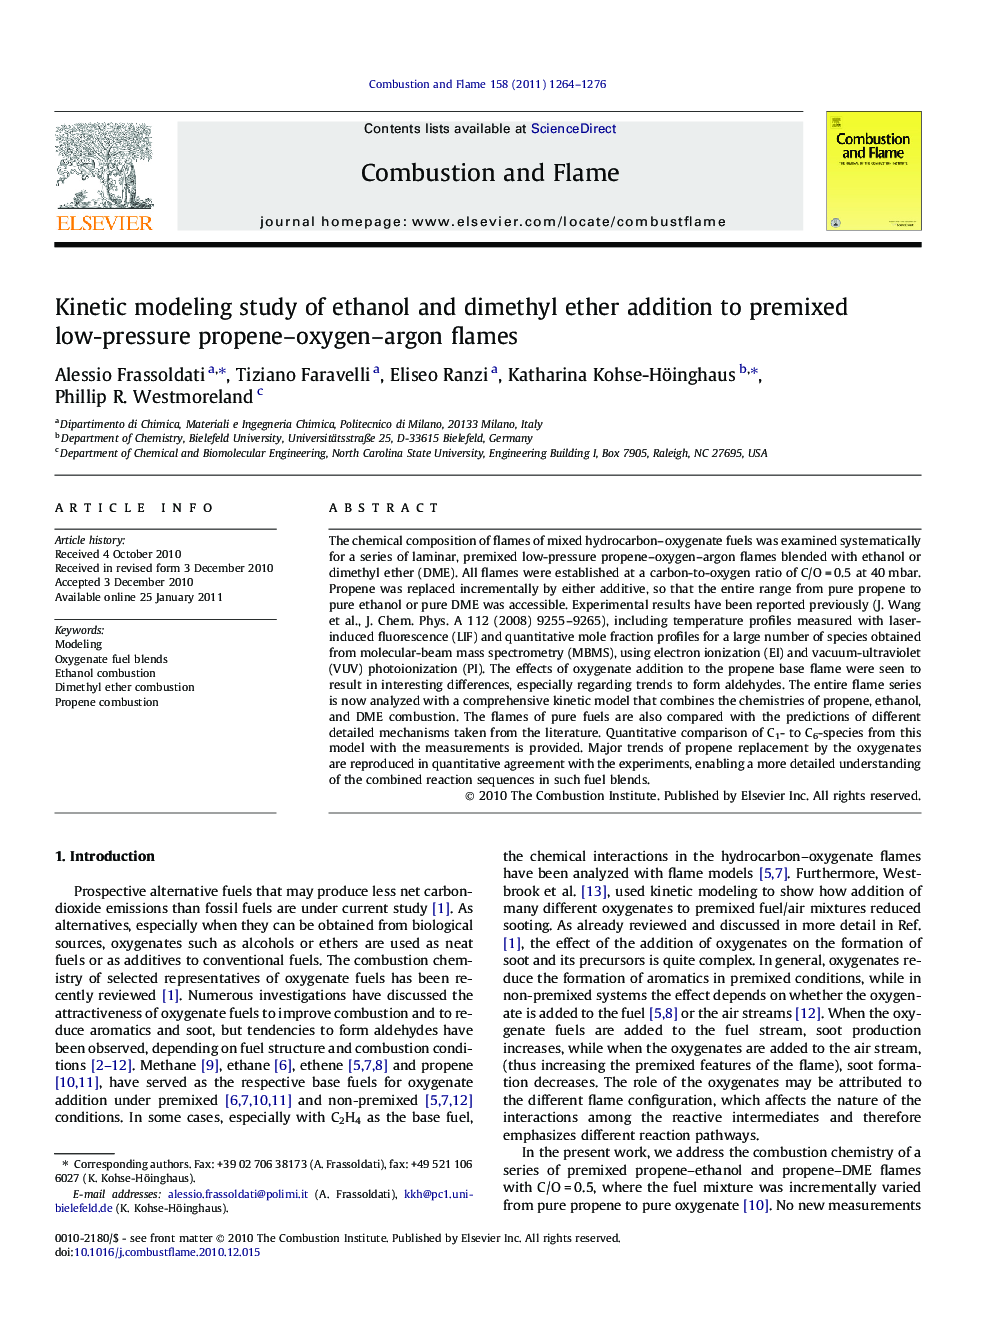 Kinetic modeling study of ethanol and dimethyl ether addition to premixed low-pressure propene–oxygen–argon flames